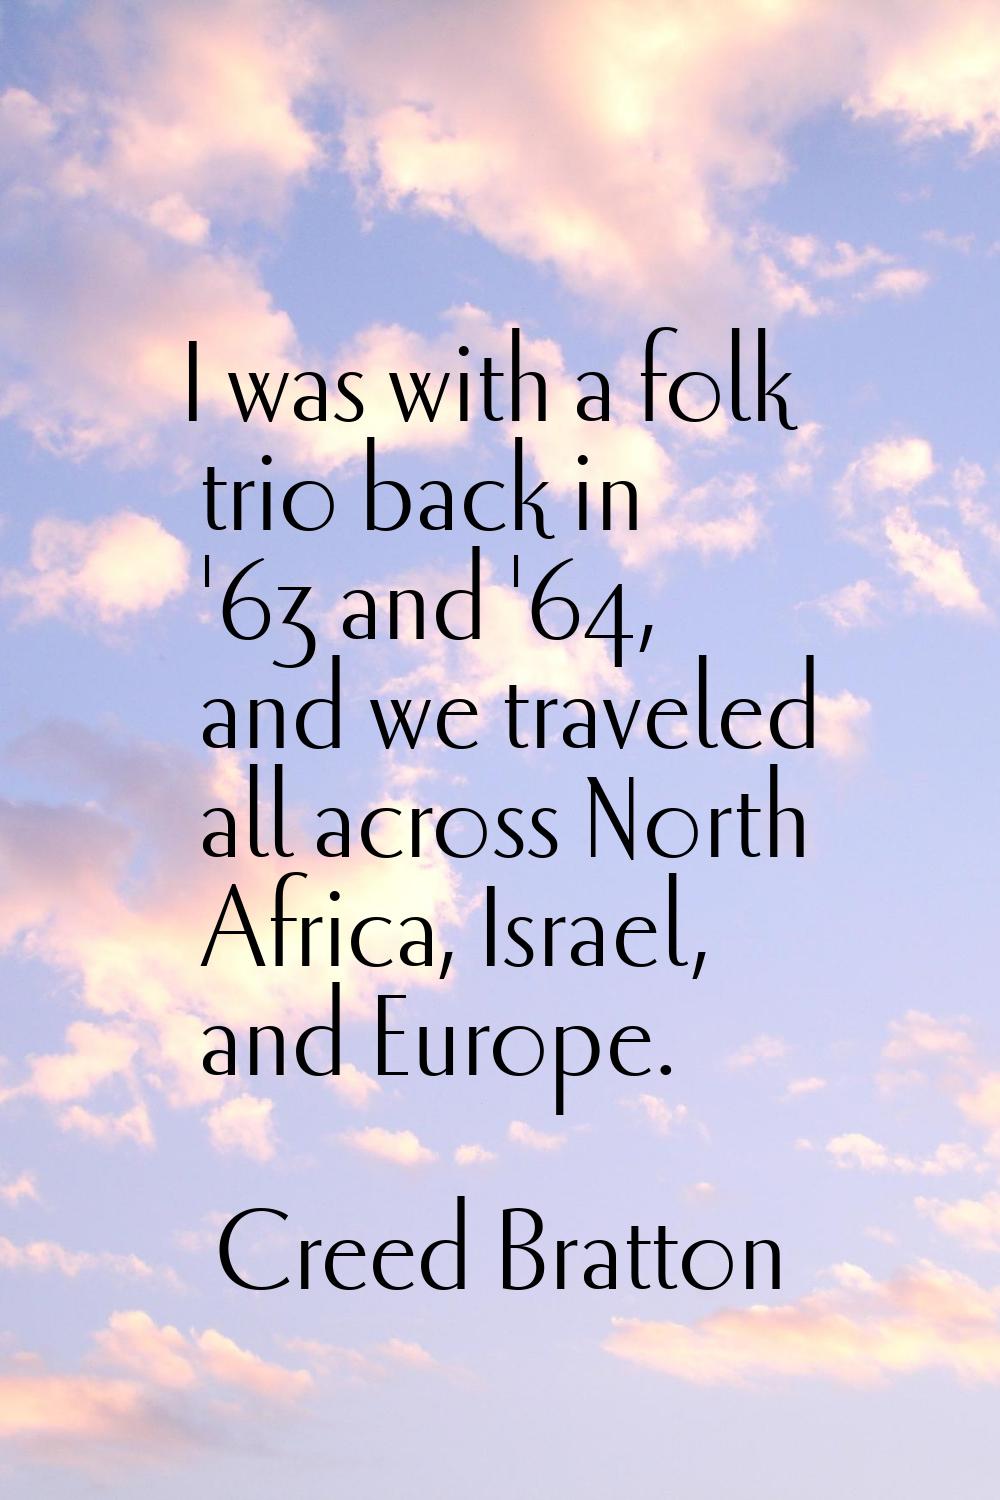 I was with a folk trio back in '63 and '64, and we traveled all across North Africa, Israel, and Eu